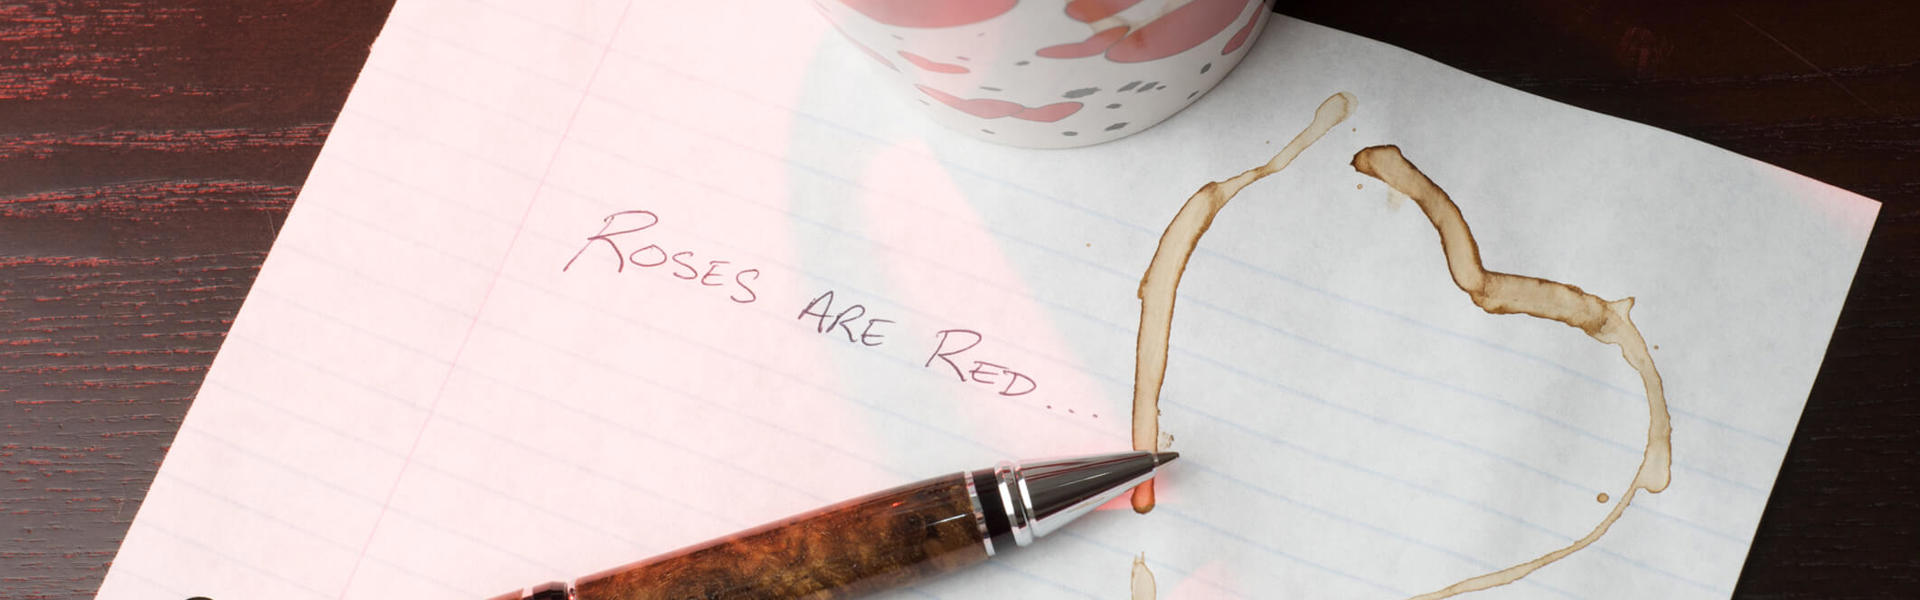 a mug of coffee resting on a valentine's day poem next to a pen and heart shaped coffee mark